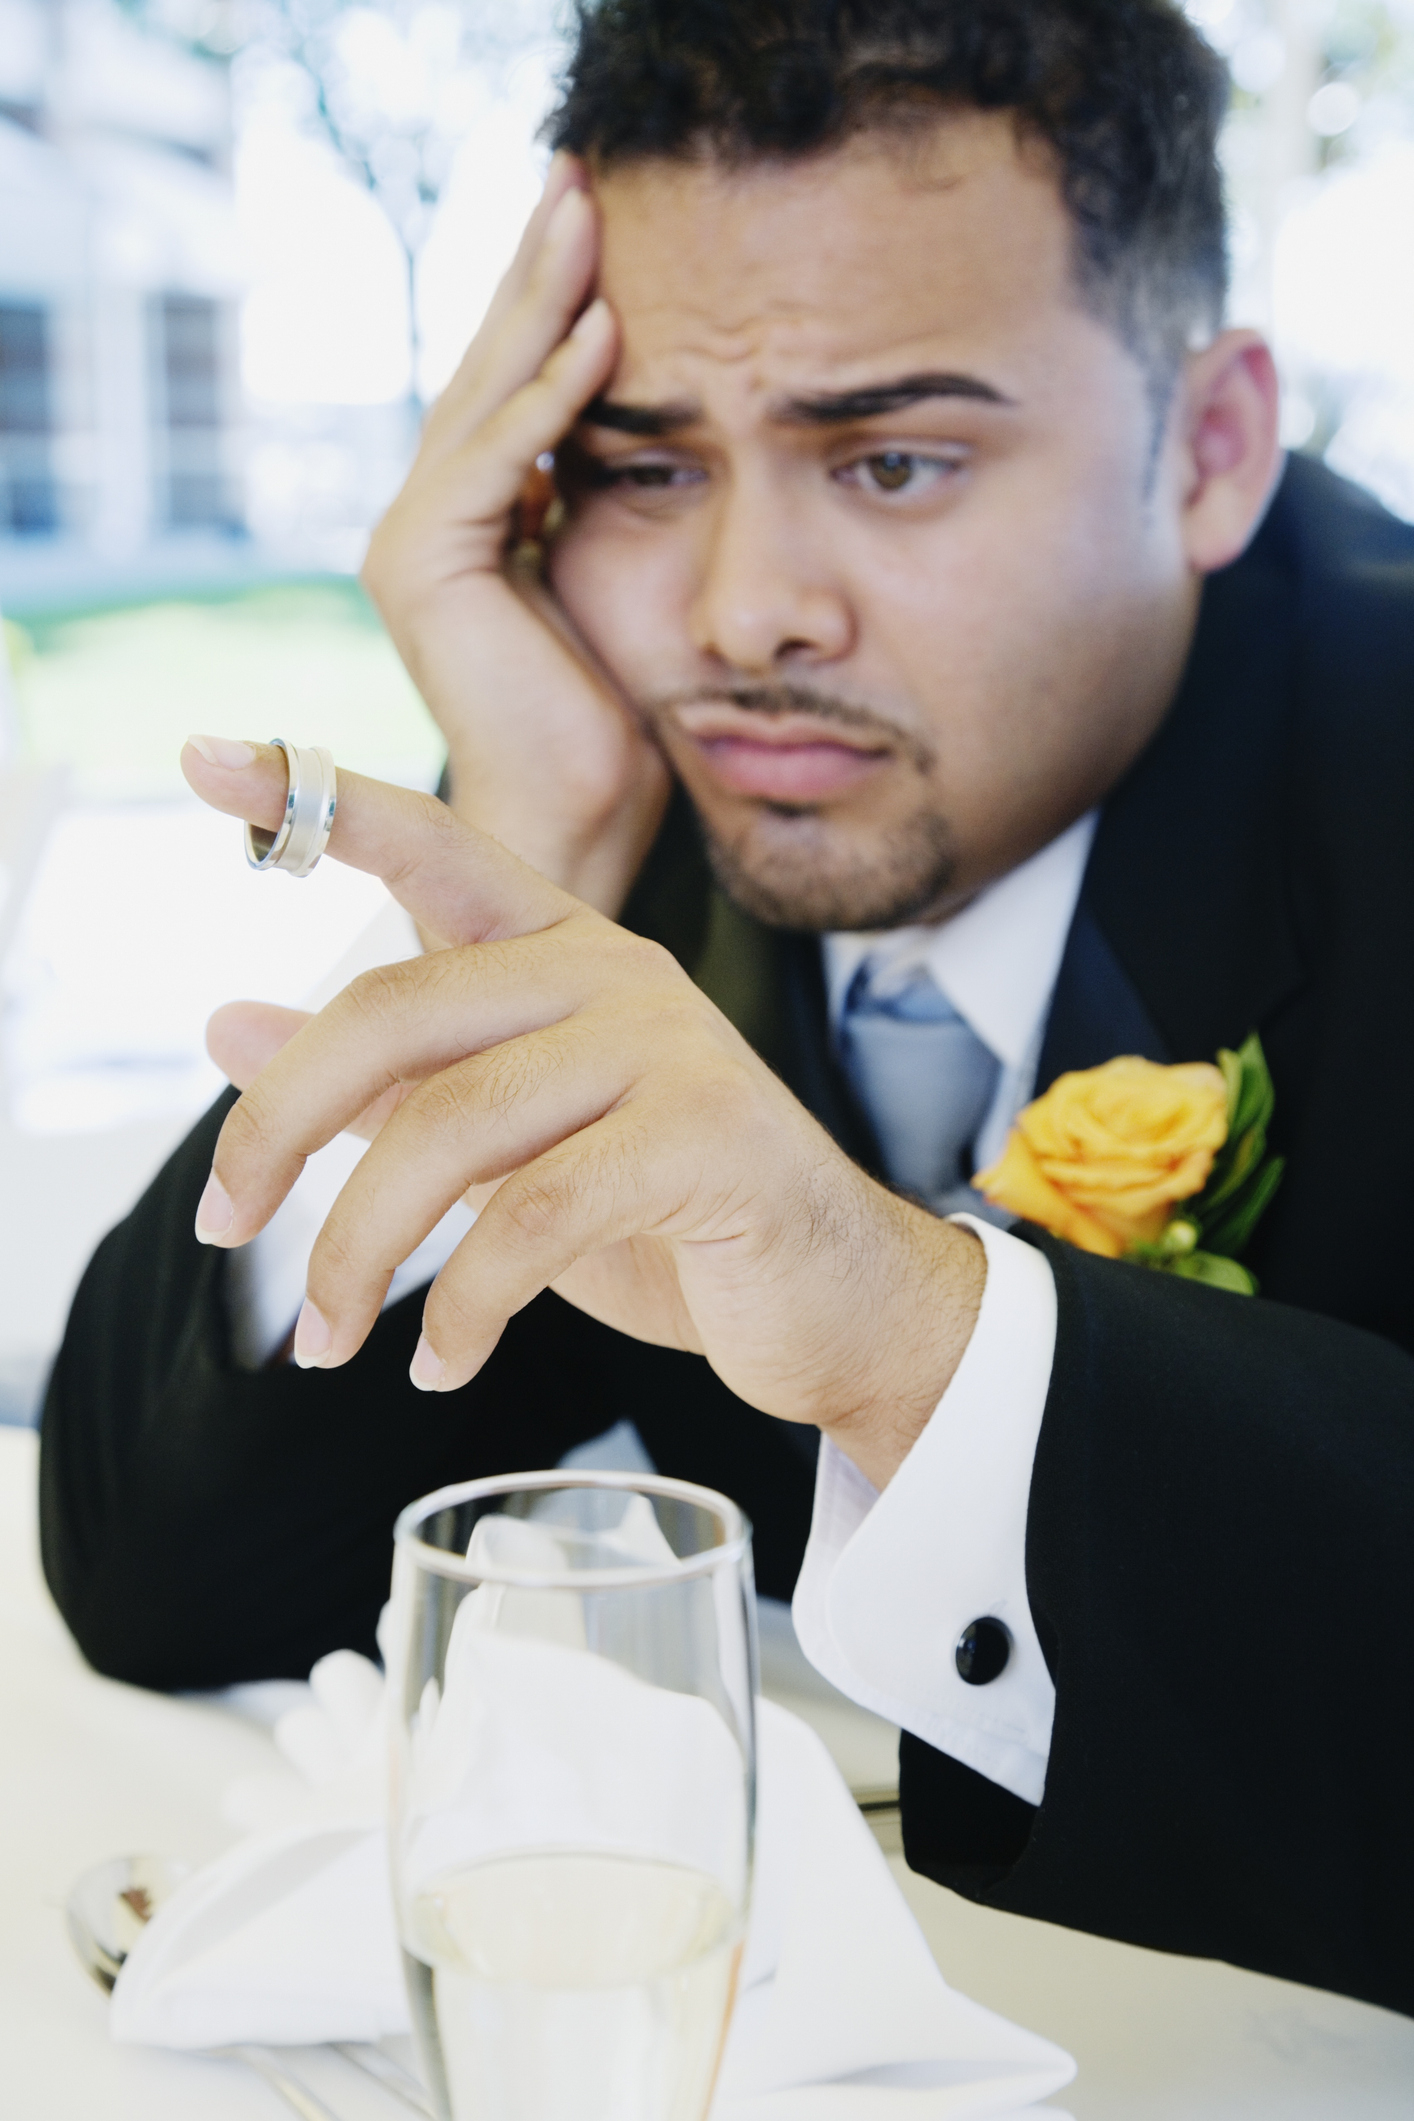 Man in a suit at a wedding appears concerned while looking at his wedding ring